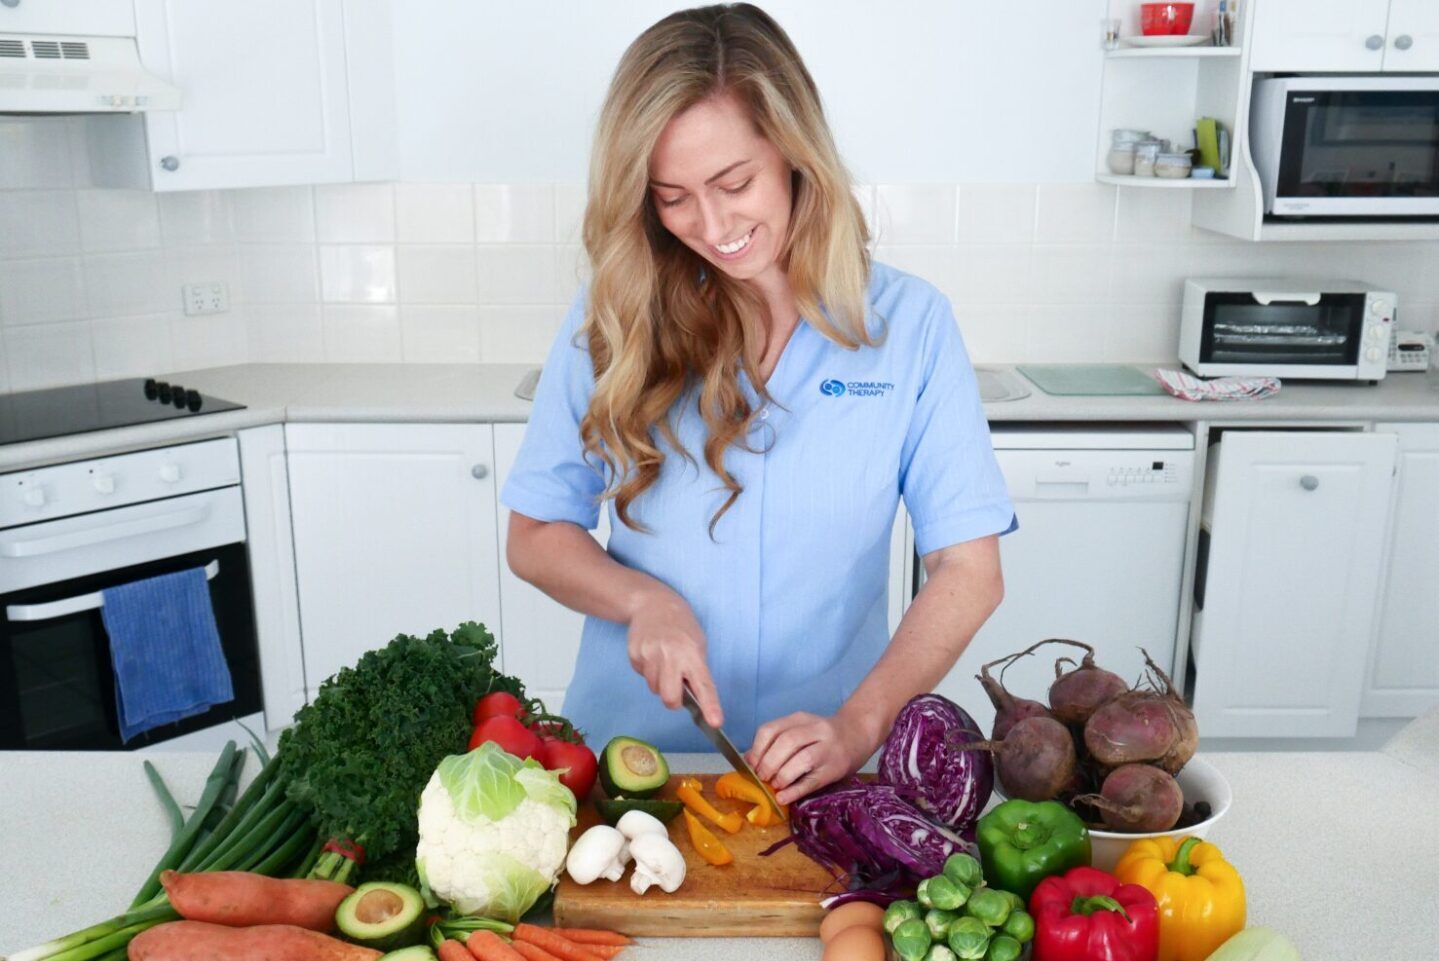 Dietitian standing behind a kitchen bench cutting vegetables on a chopping board